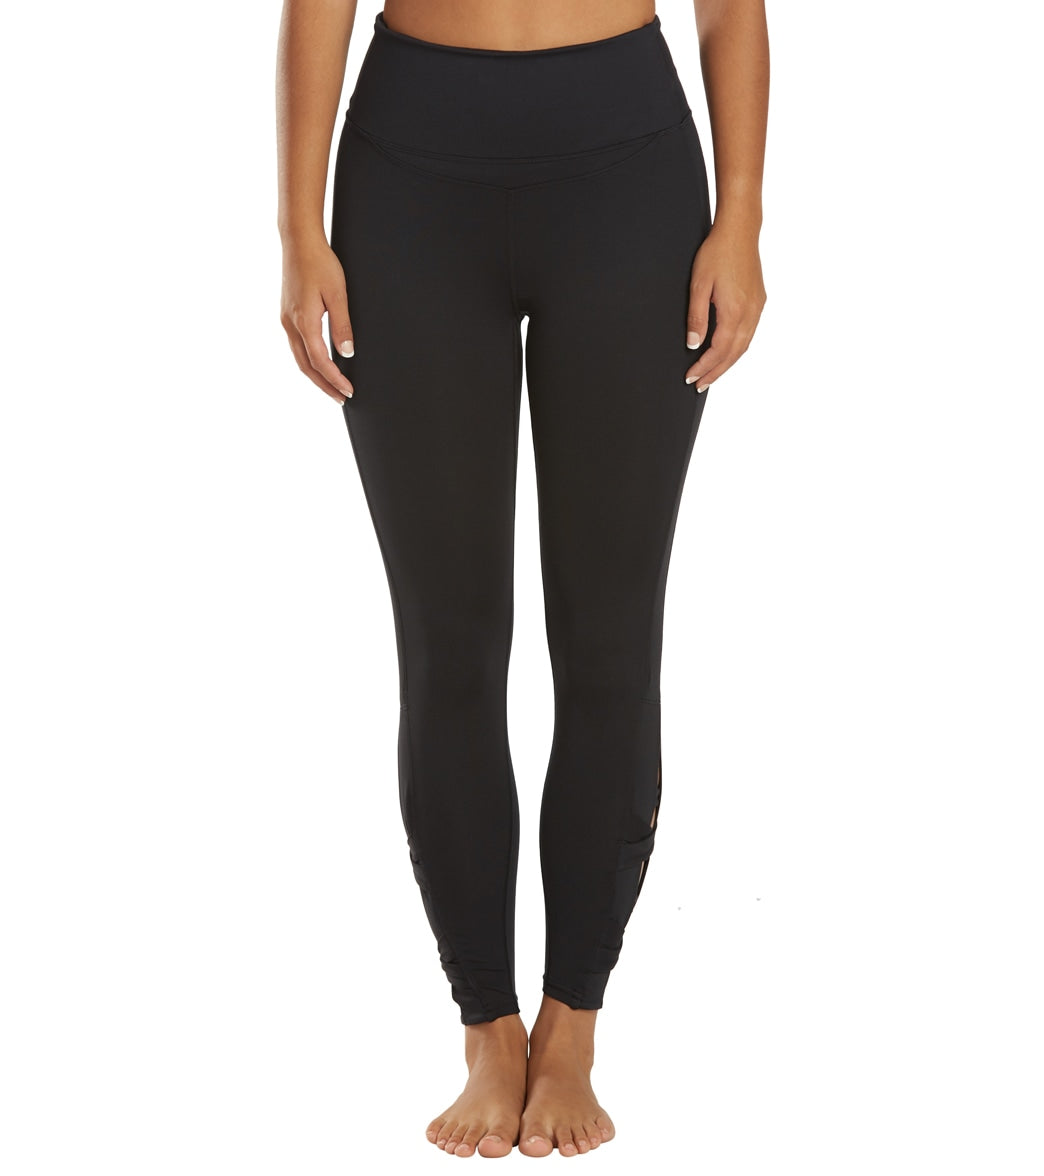 Free People Plank All Day Leggings Black XS-S (US Women's 0-6) at   Women's Clothing store